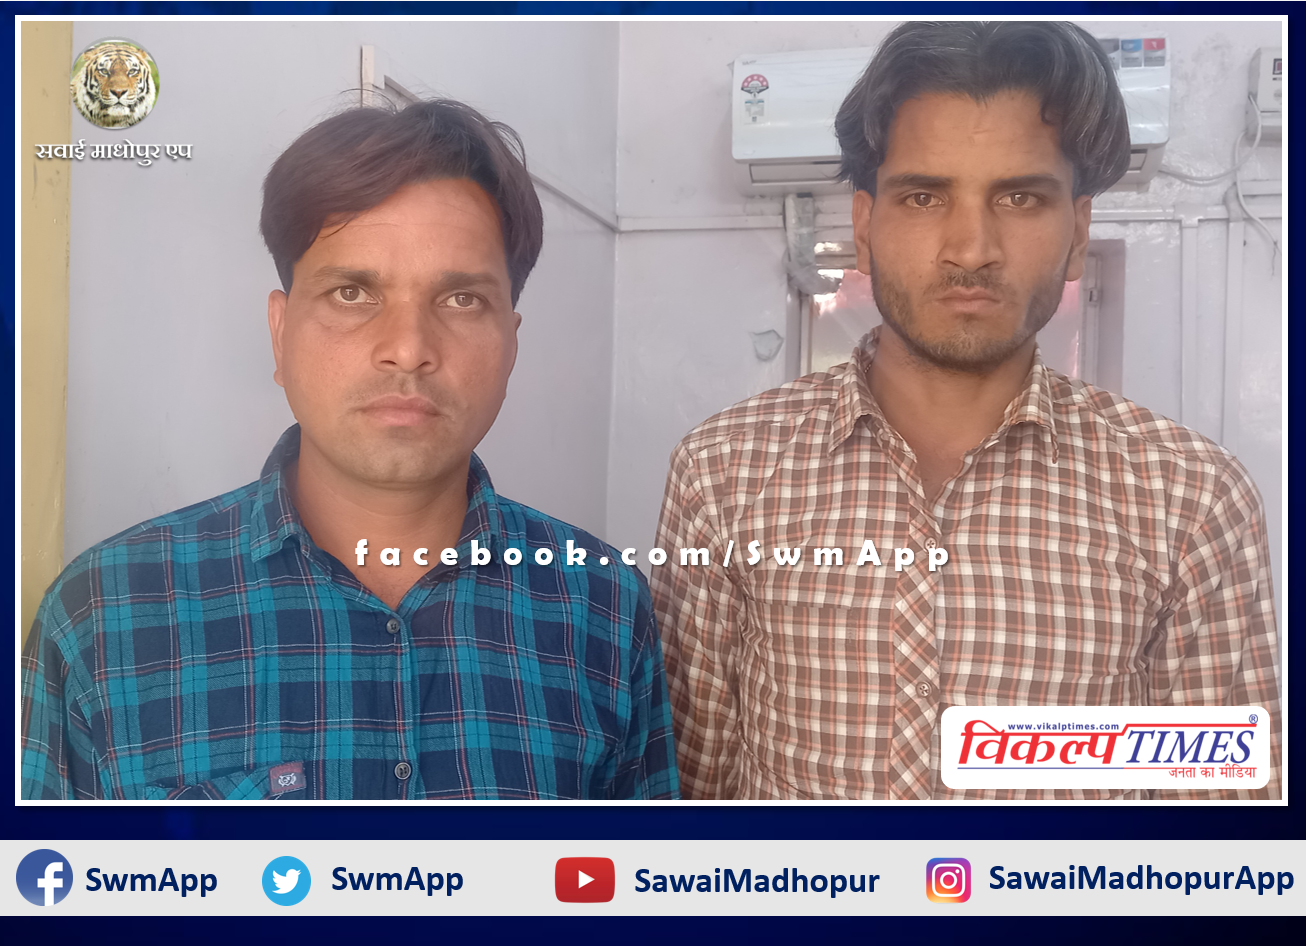 Police arrested two people wanted for illegal gravel mining in chauth ka barwara sawai madhopur